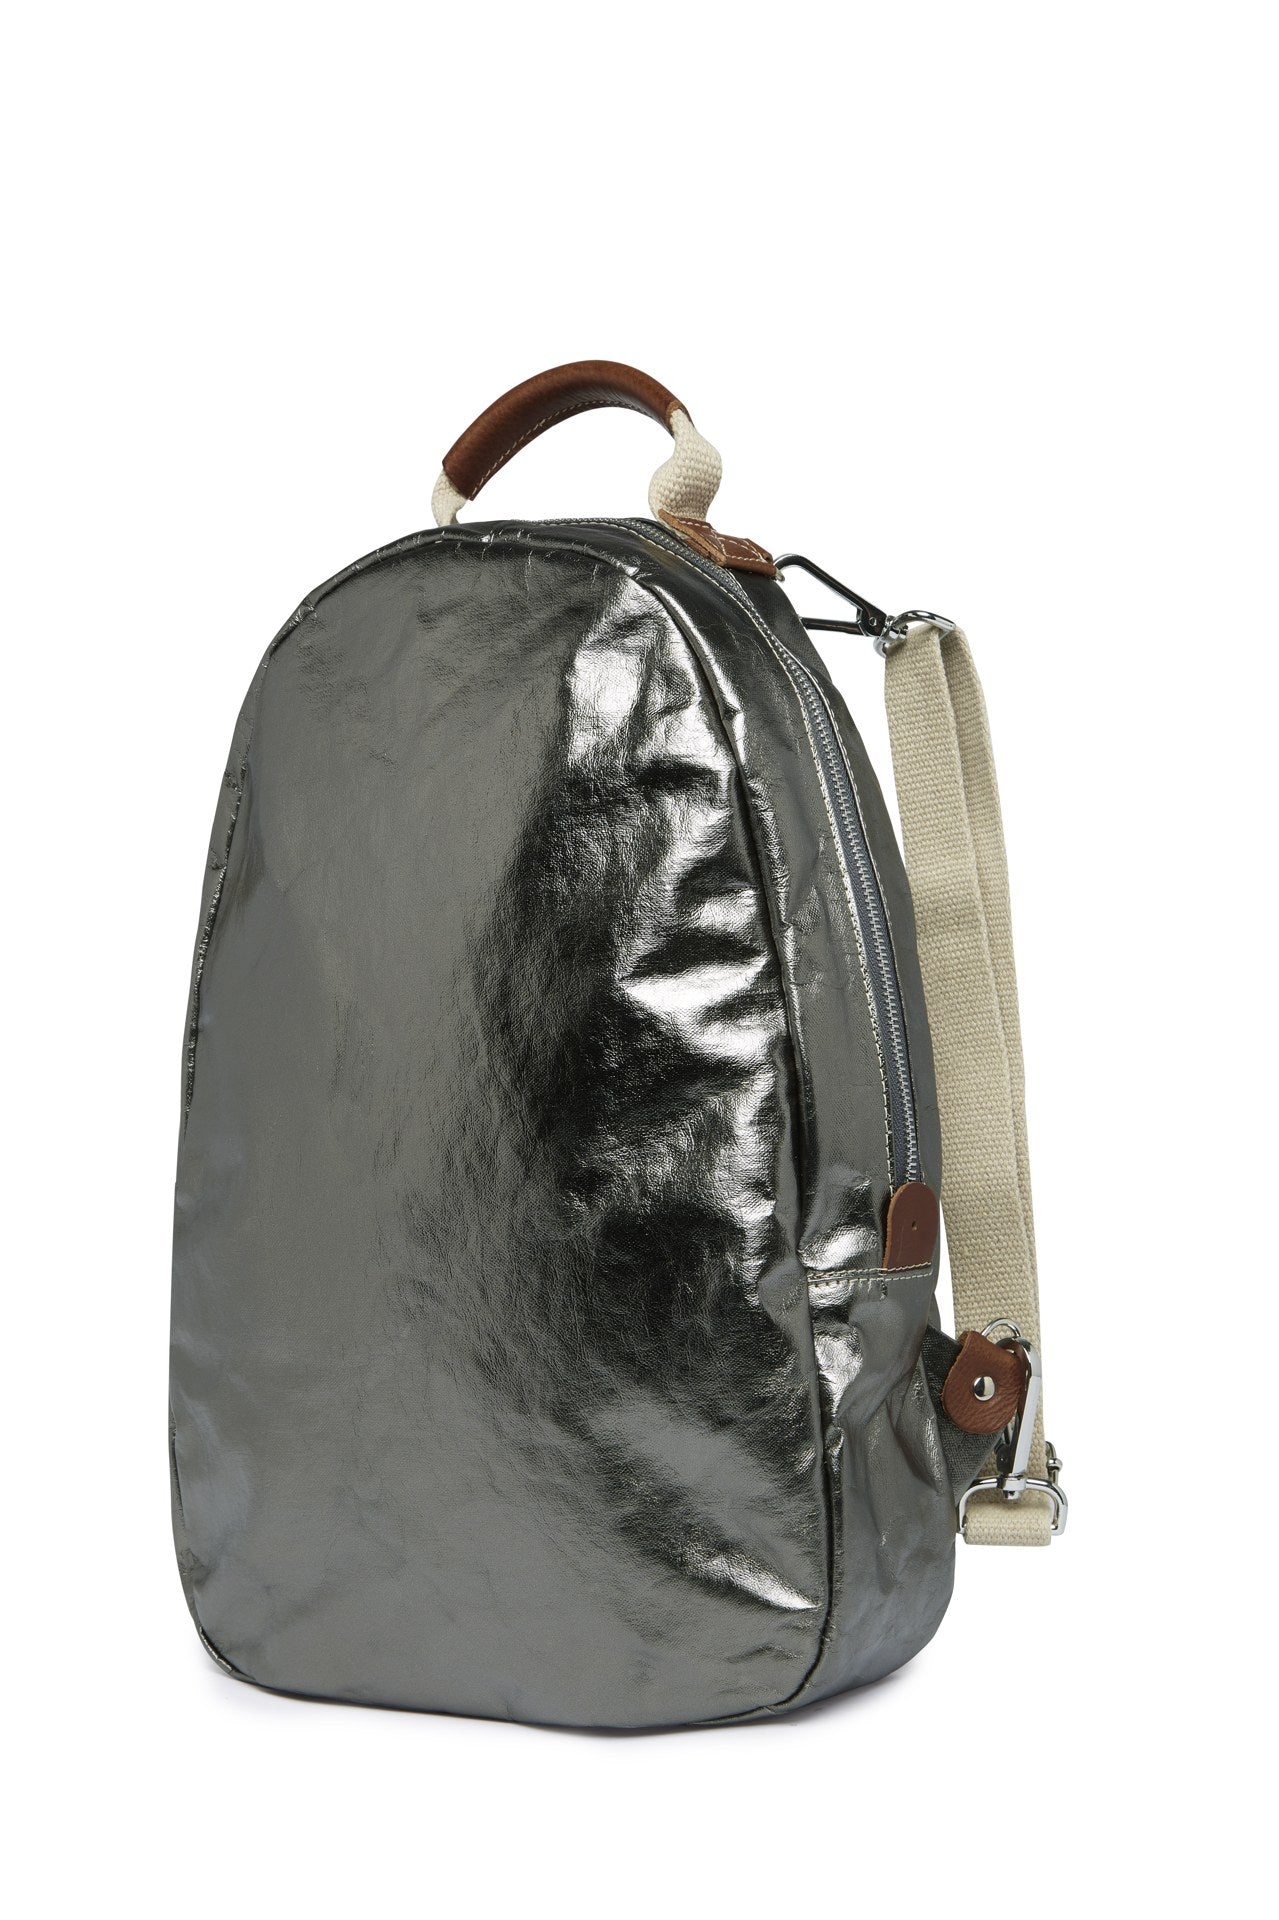 An oval washable paper backpack is shown from a 3/4 angle. It has a top handle, two adjustable canvas shoulder straps, and is metallic pewter in colour.